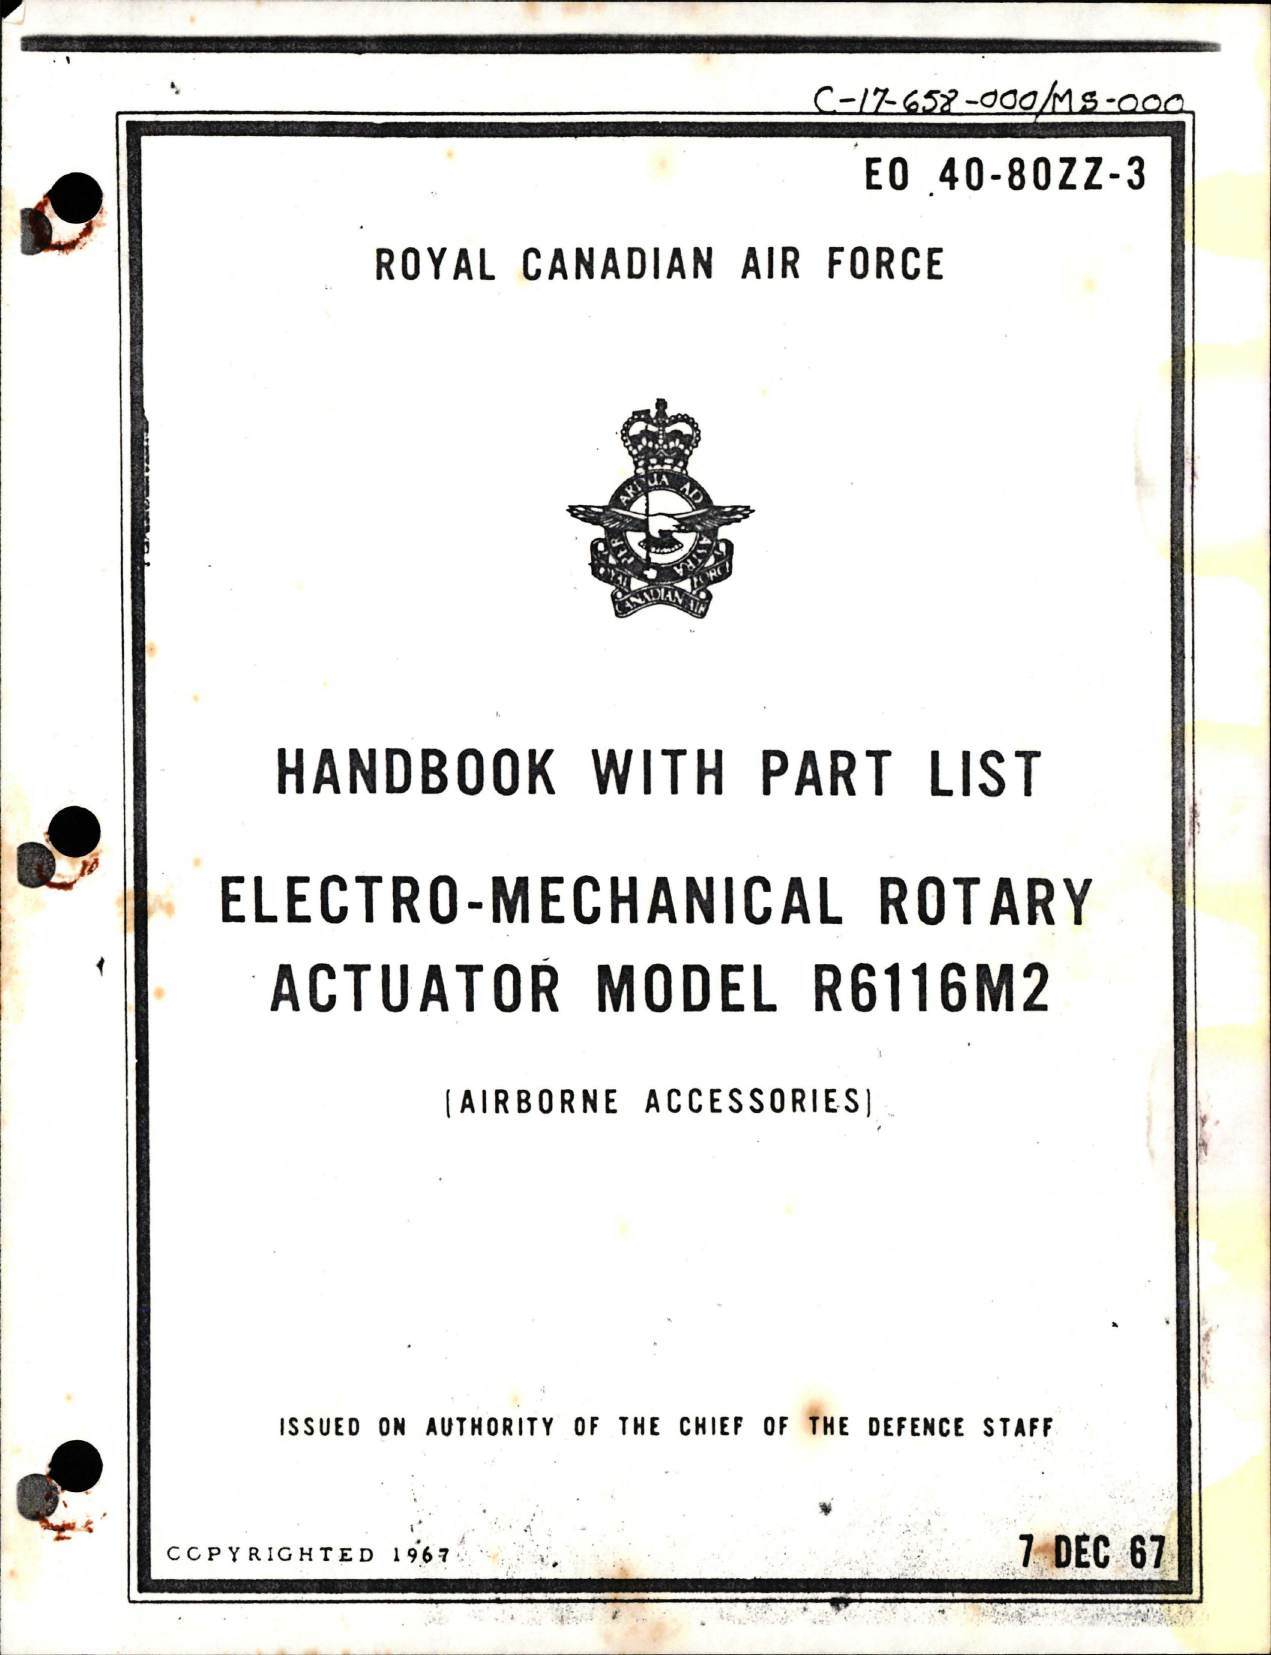 Sample page 1 from AirCorps Library document: Handbook with Parts List for Electro-Mechanical Rotary Actuator Model R6116M2 